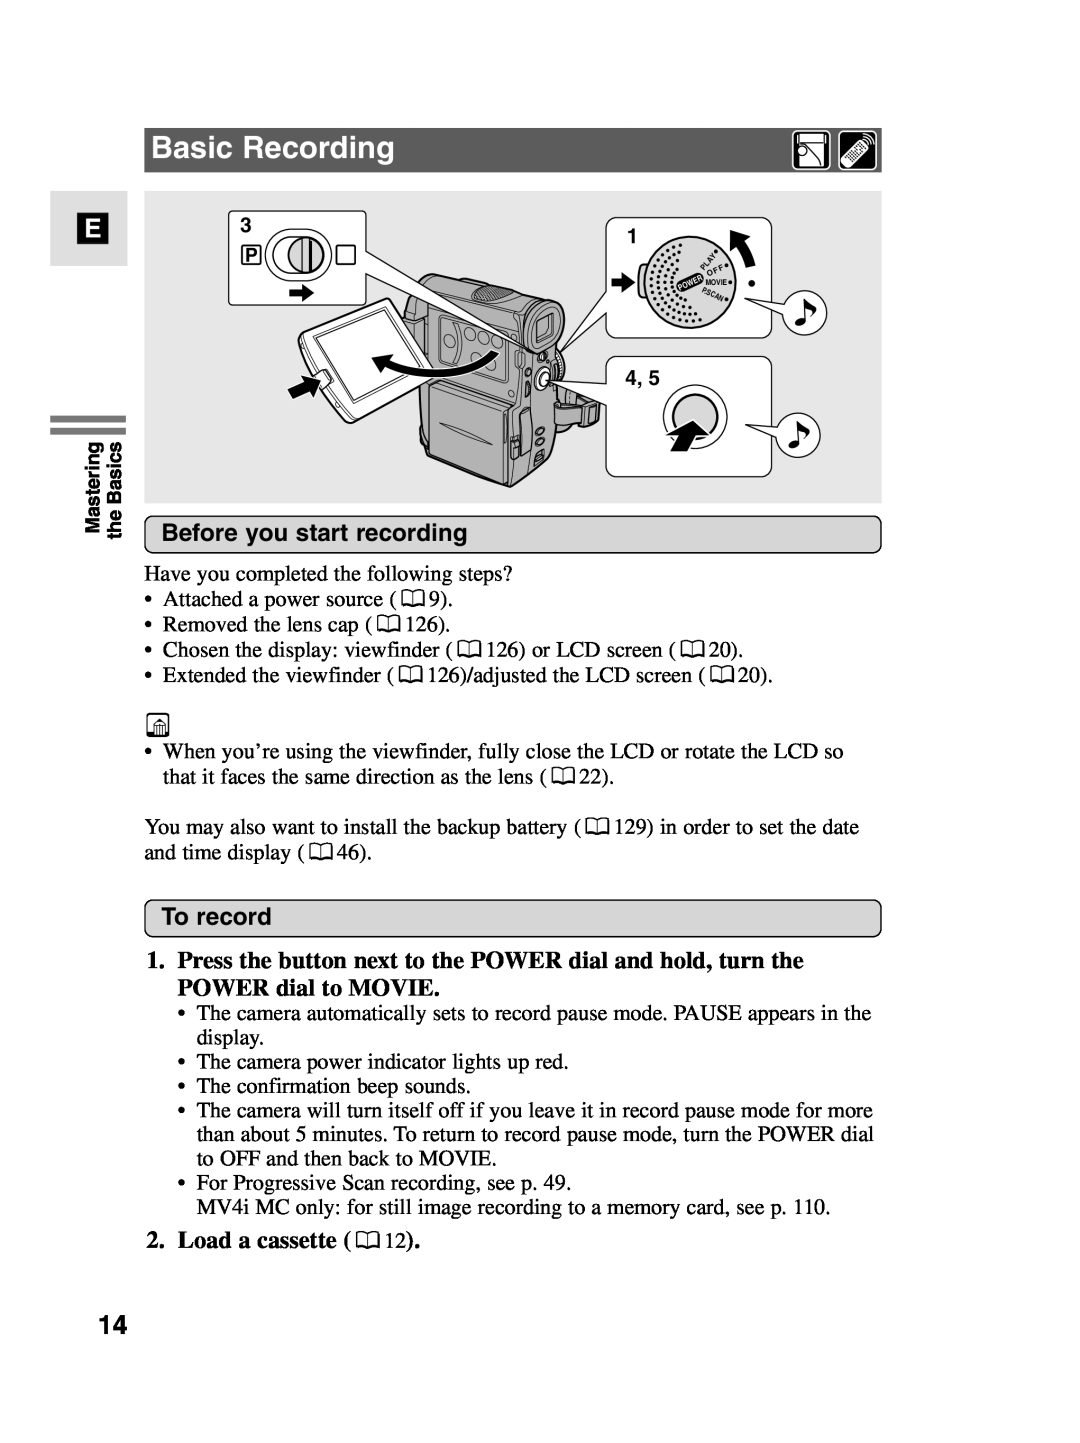 Canon MV4i MC instruction manual Basic Recording, Load a cassette, Before you start recording, To record 